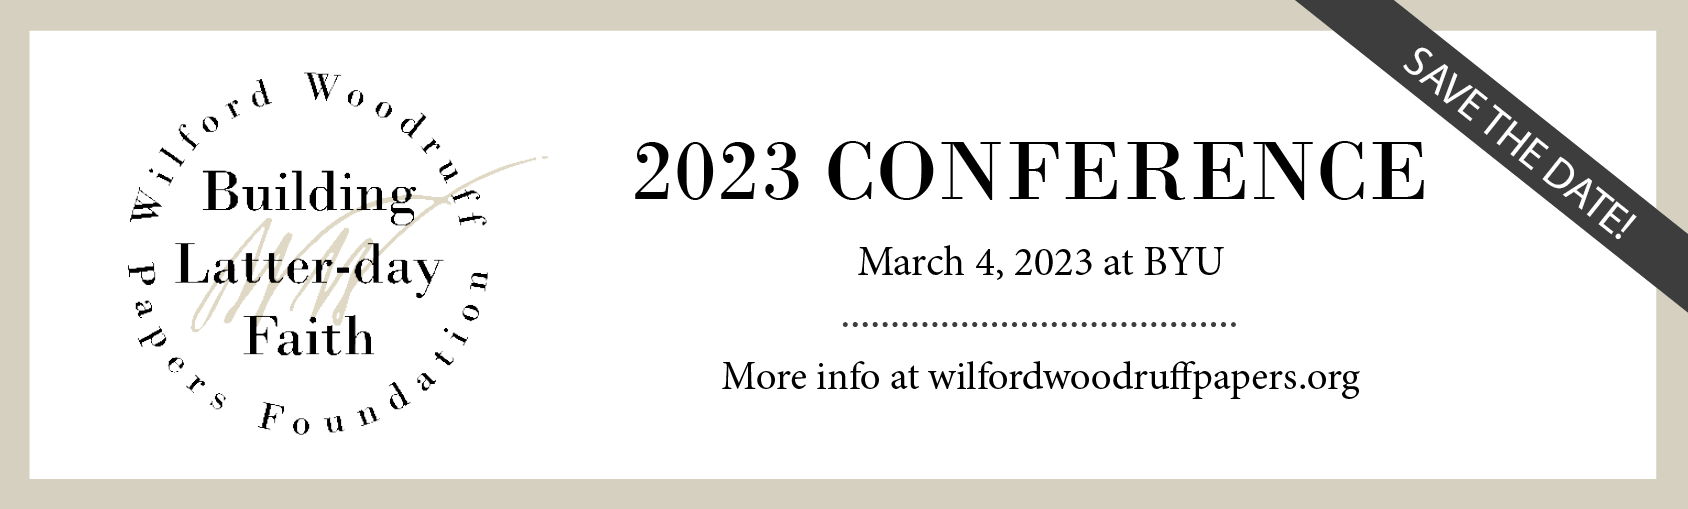 2023 Conference Building Latter-day Faith: Wilford Woodruff Papers Foundation